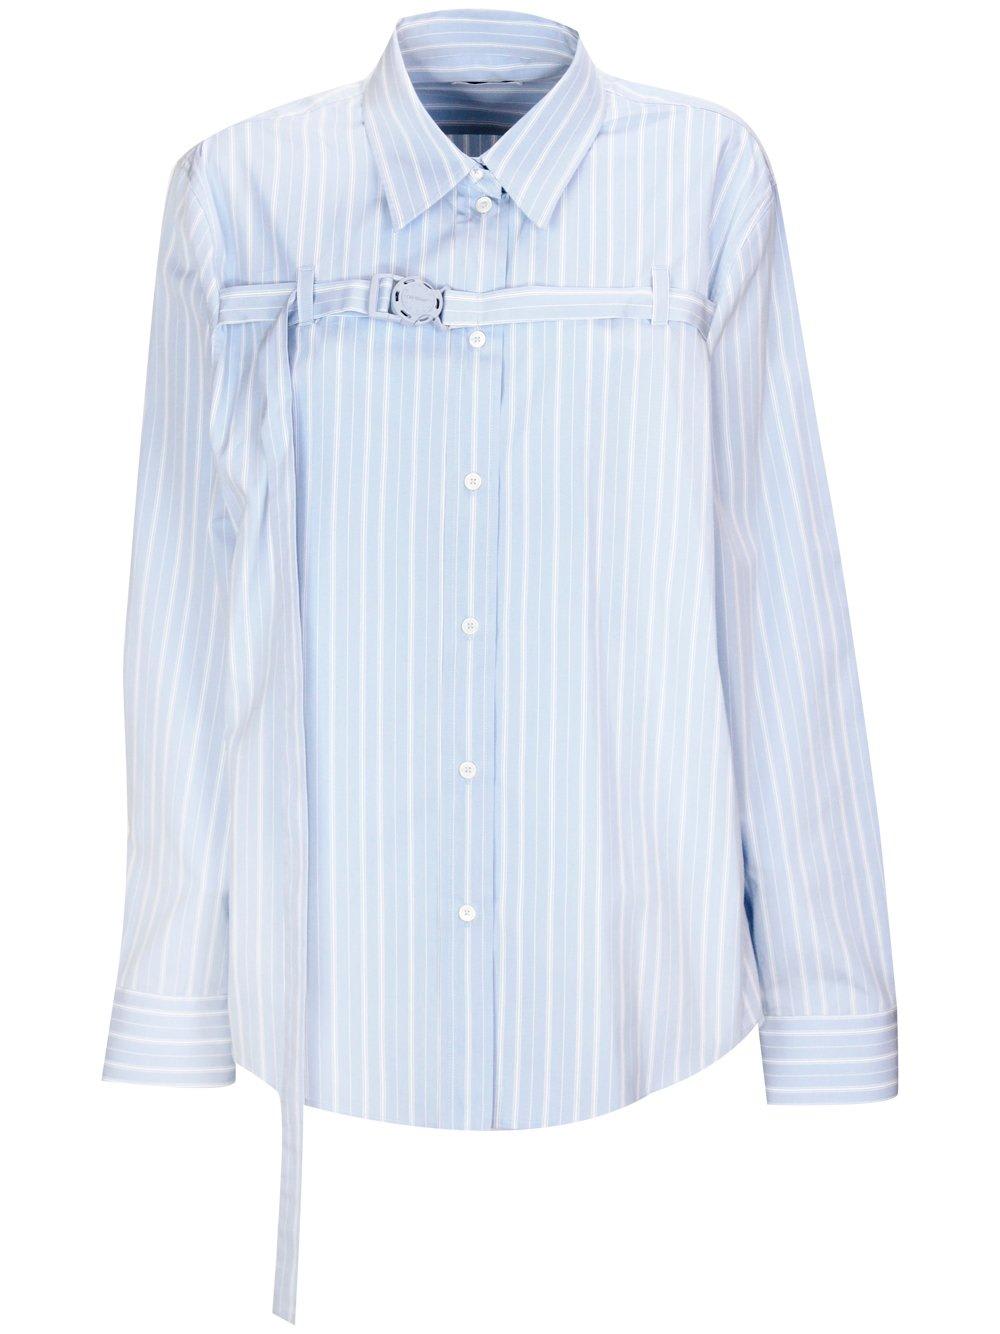 OFF-WHITE STRIPED CUT-OUT SHIRT